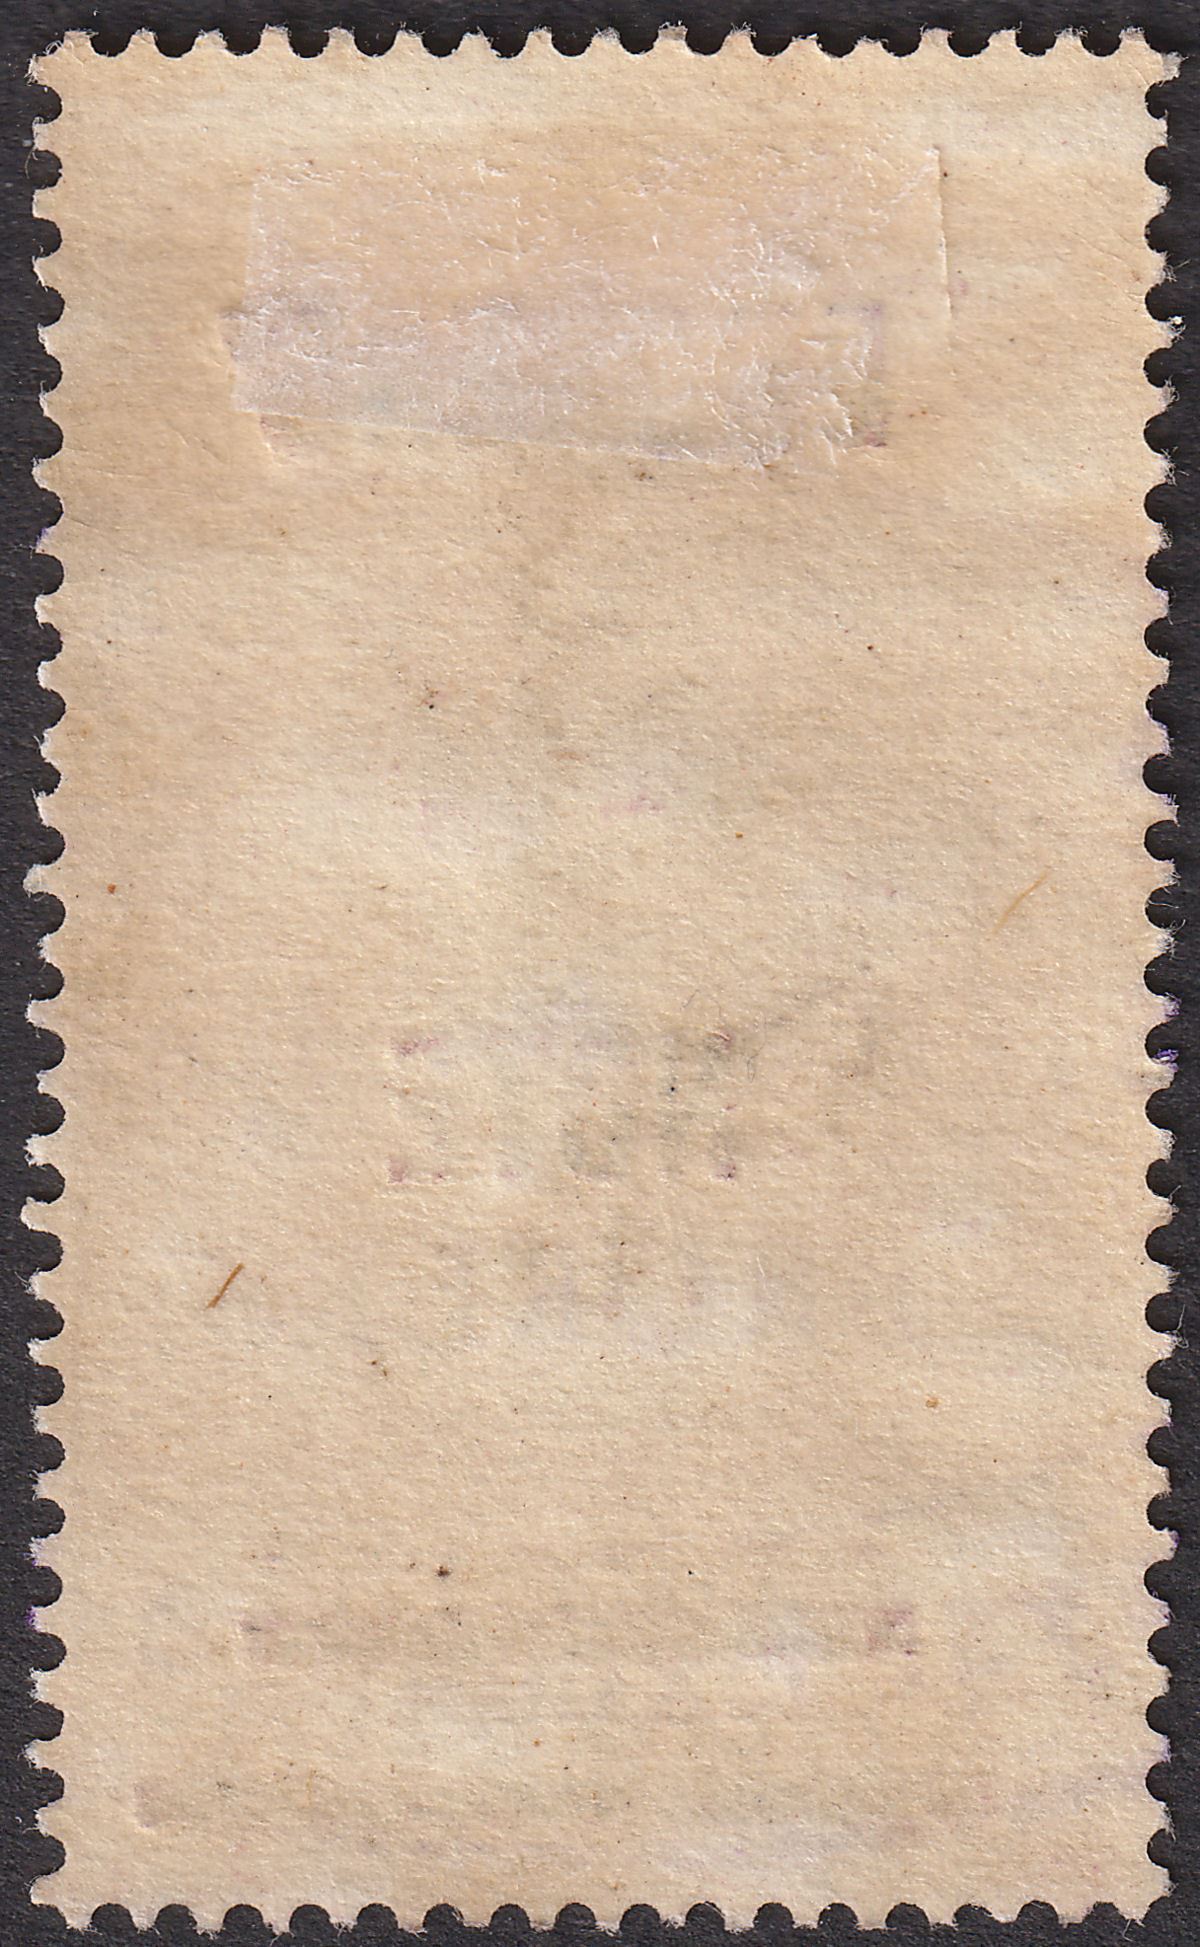 India 1910 KEVII Revenue Brokers' Note Provisional Opt 1r Purple + Grn Used BF4